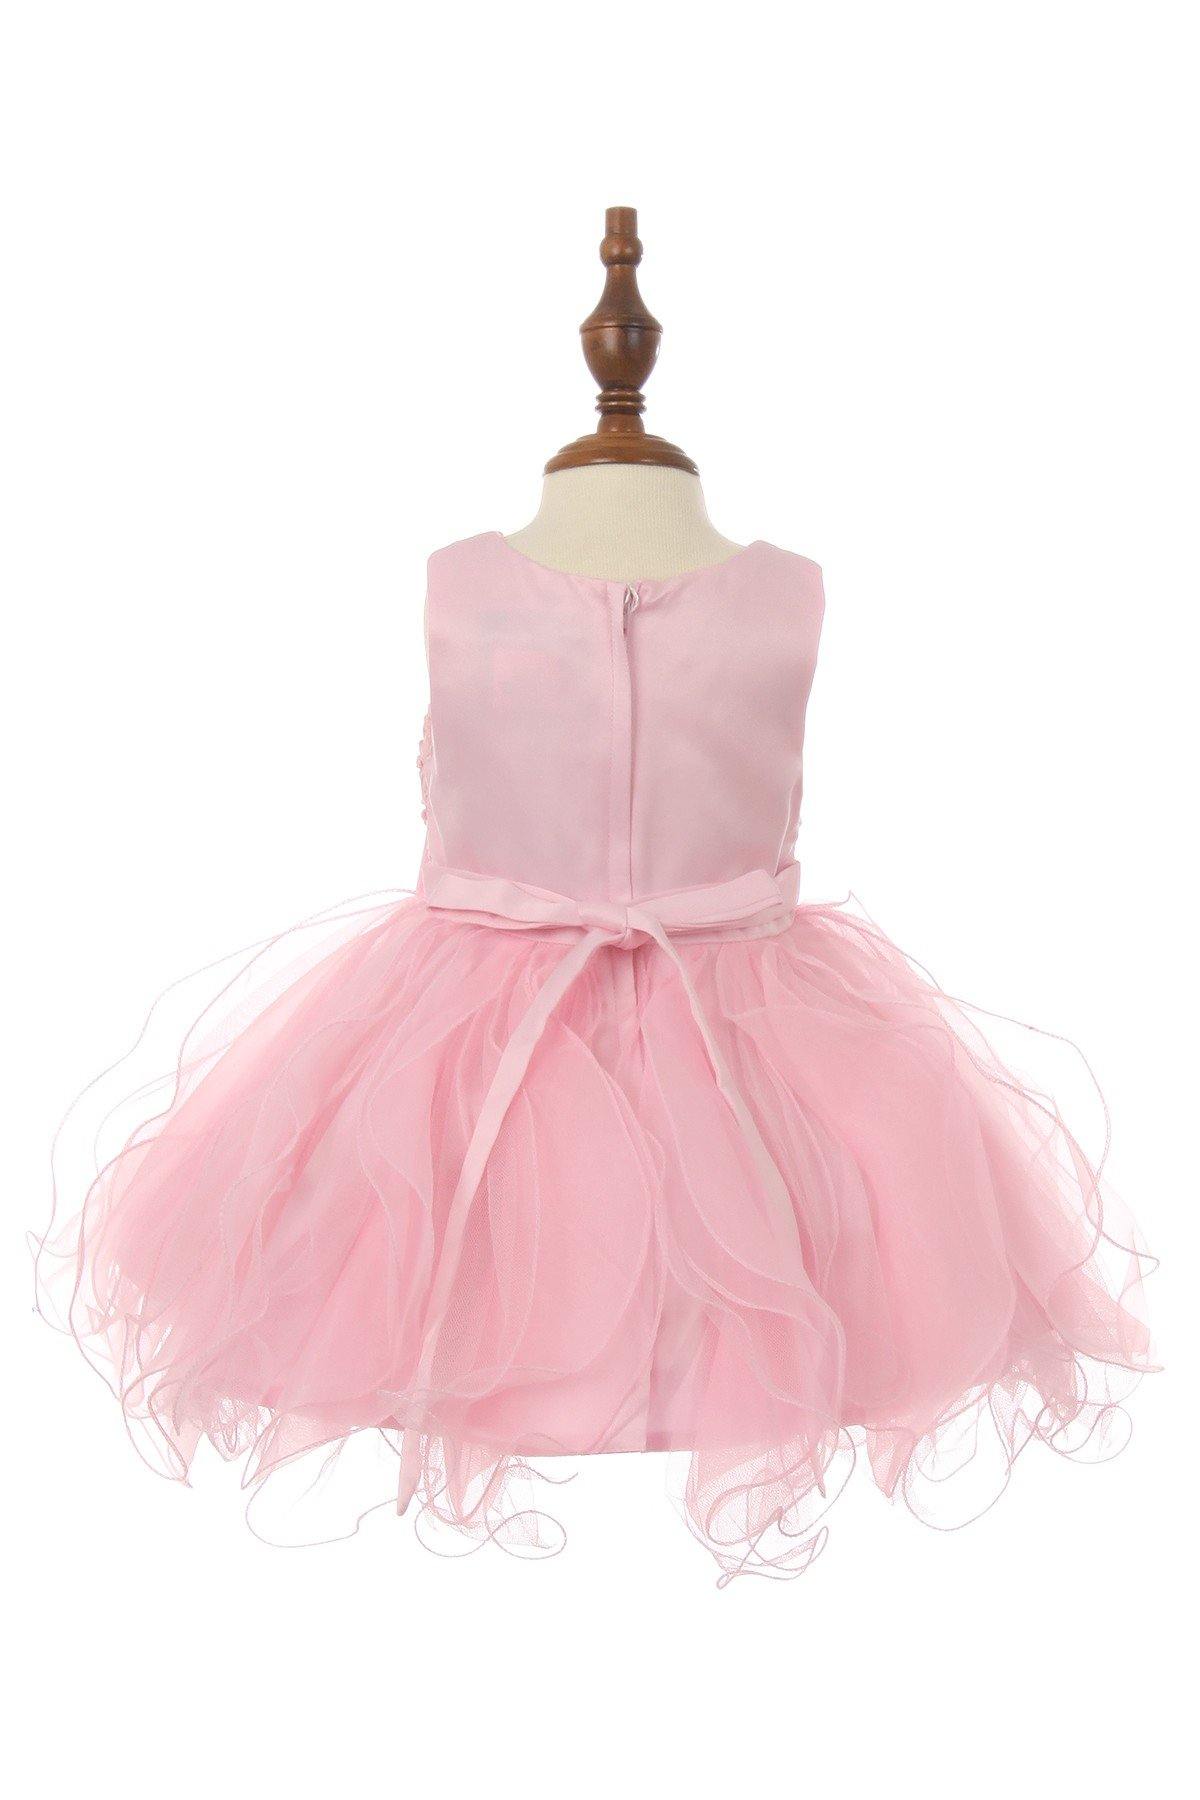 Short Party Sequin and Organza Flower Girls Dress - The Dress Outlet Cinderella Couture